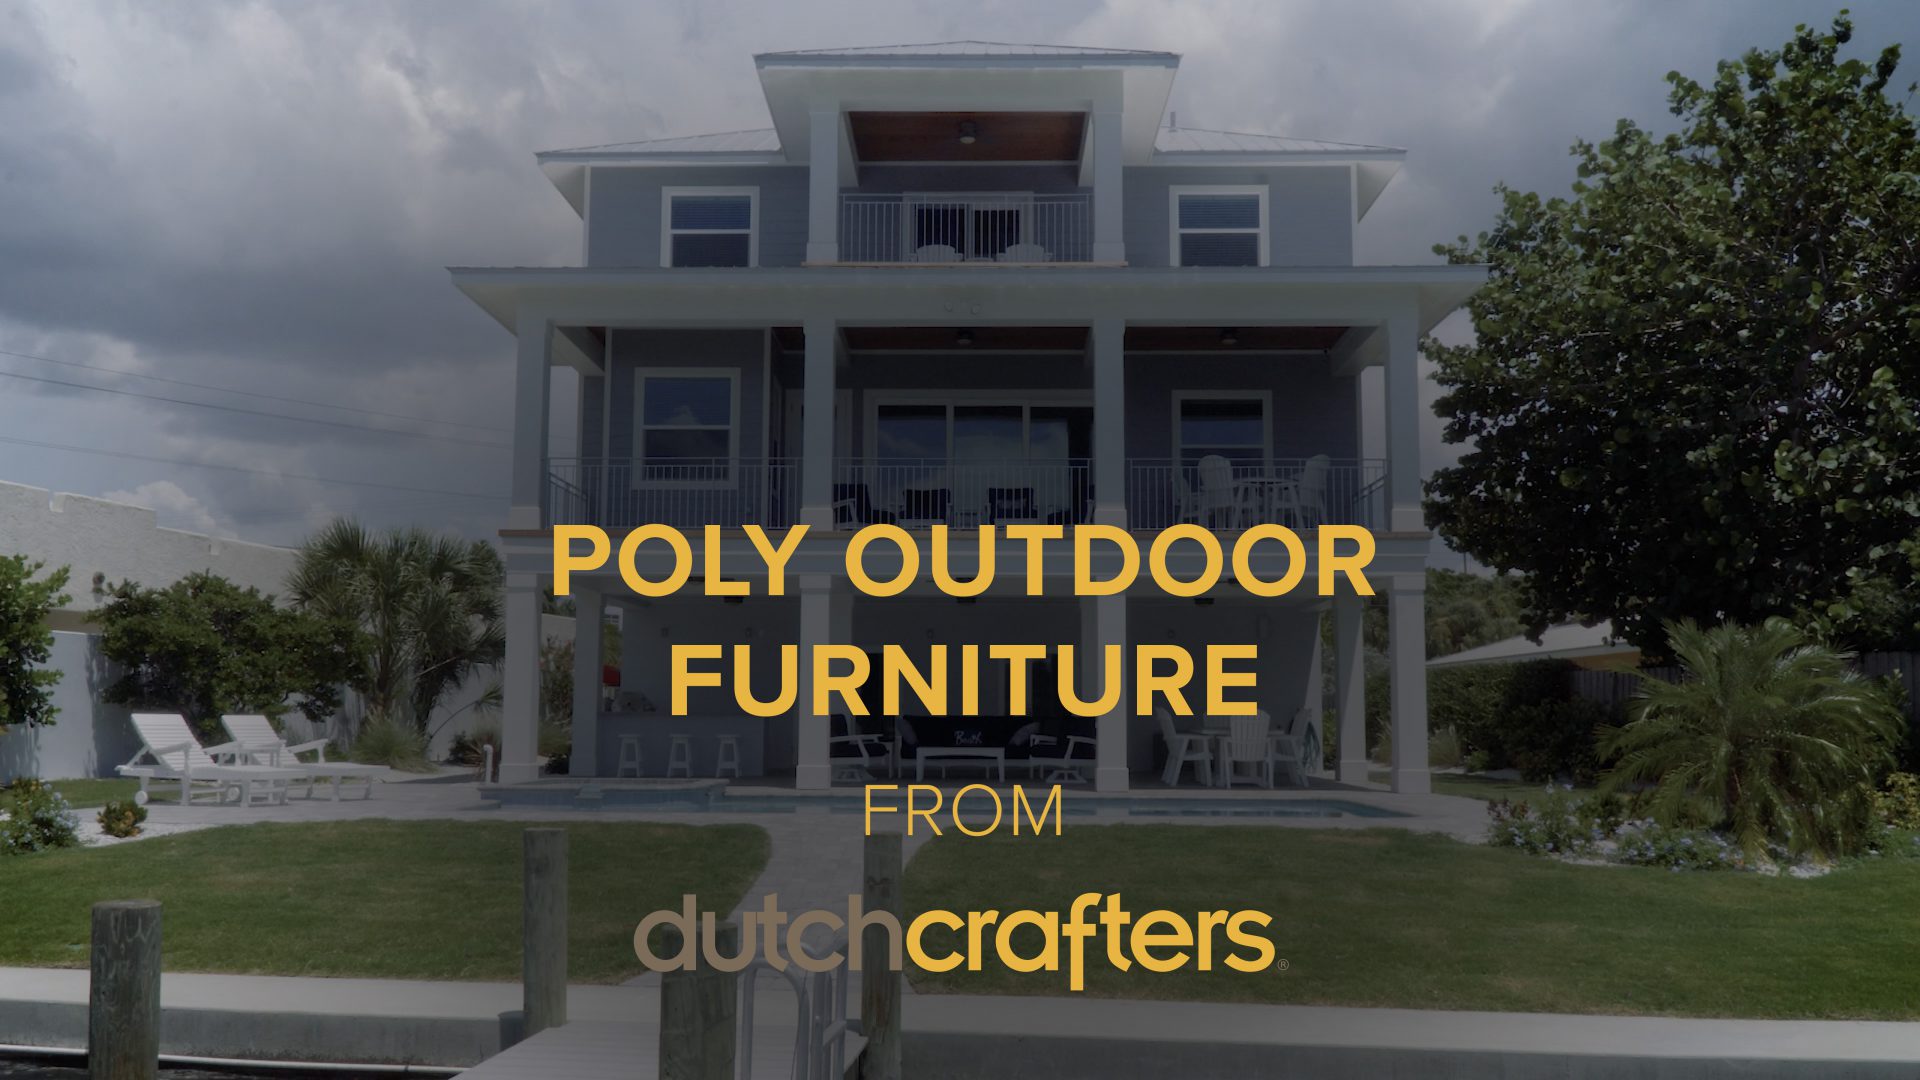 A DutchCrafters customer testimonial about outdoor poly furniture